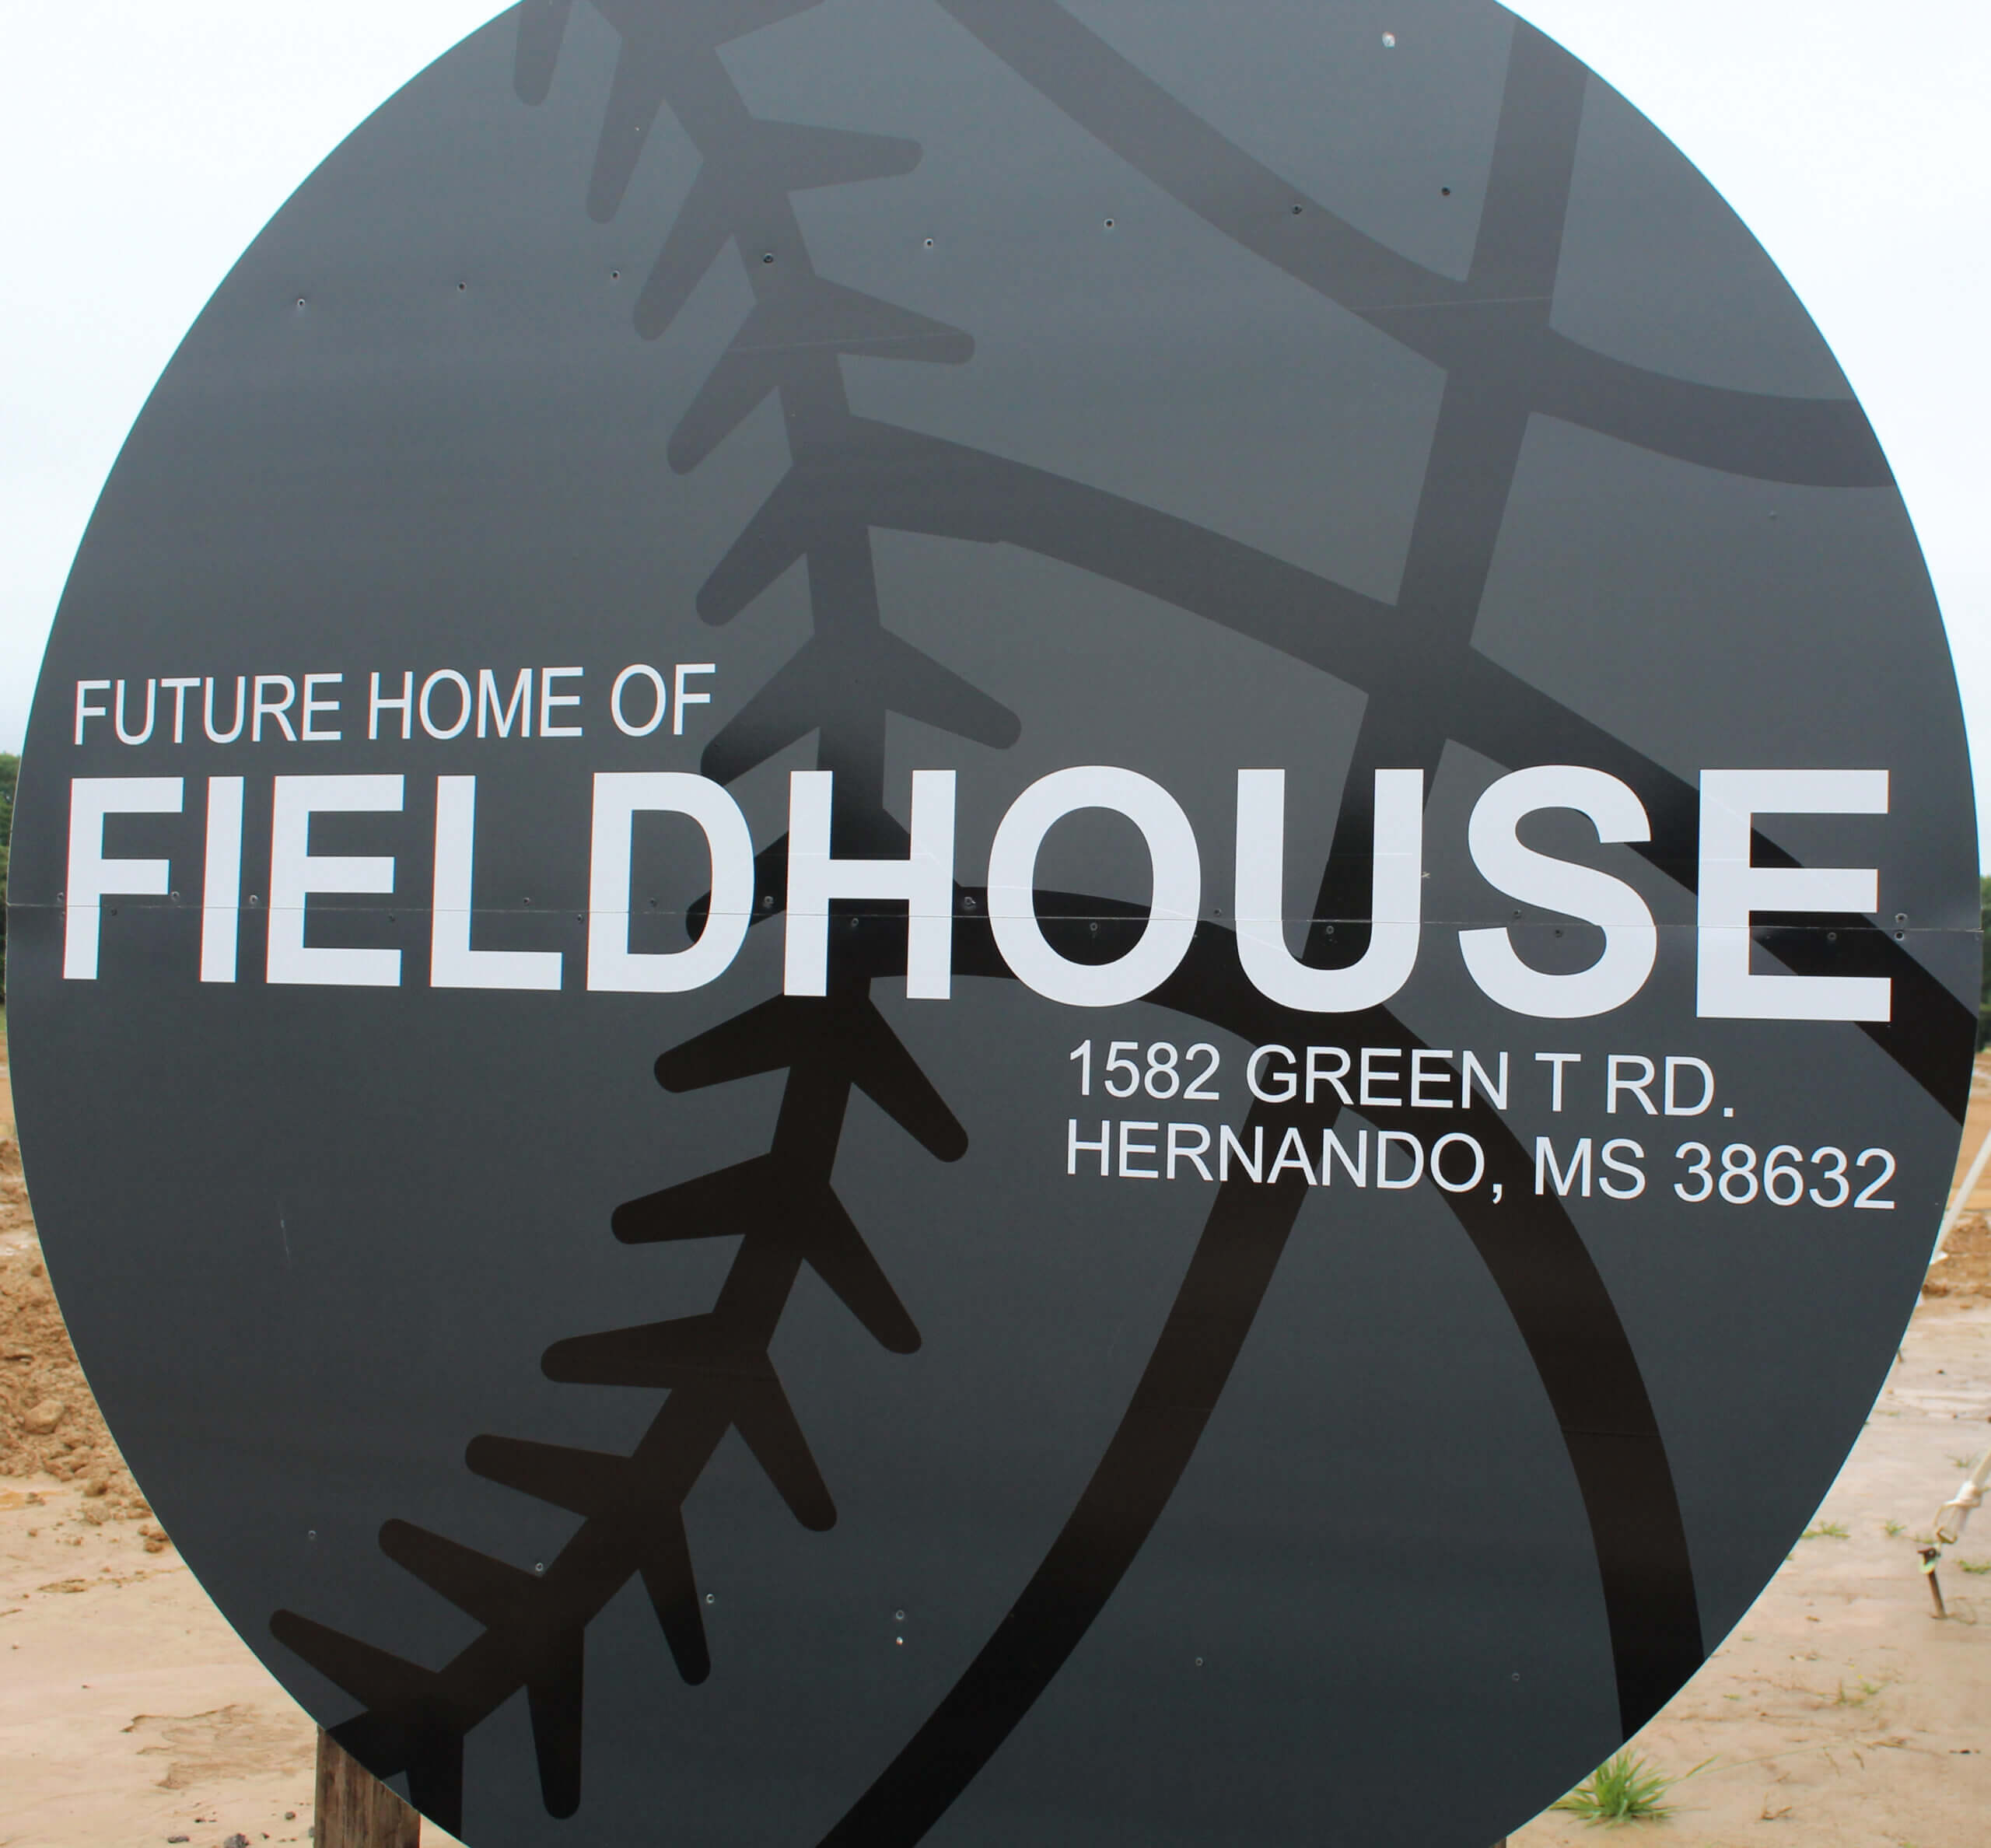 Fieldhouse sports complex holds groundbreaking